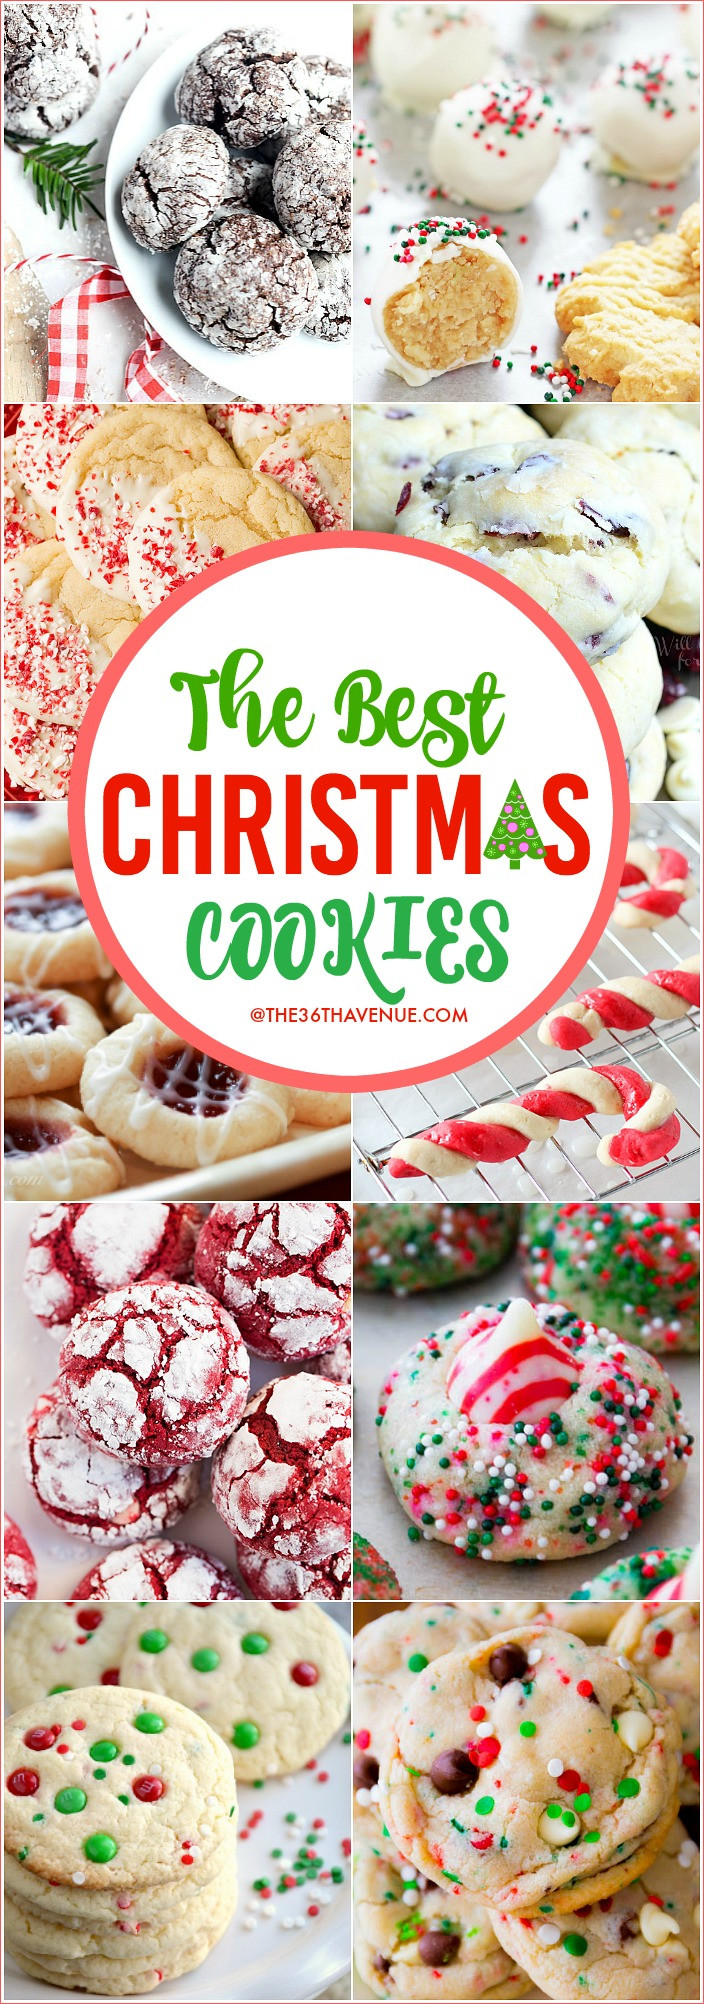 Christmas Baking Gifts
 Christmas Cookies Easy Christmas Recipes The 36th AVENUE